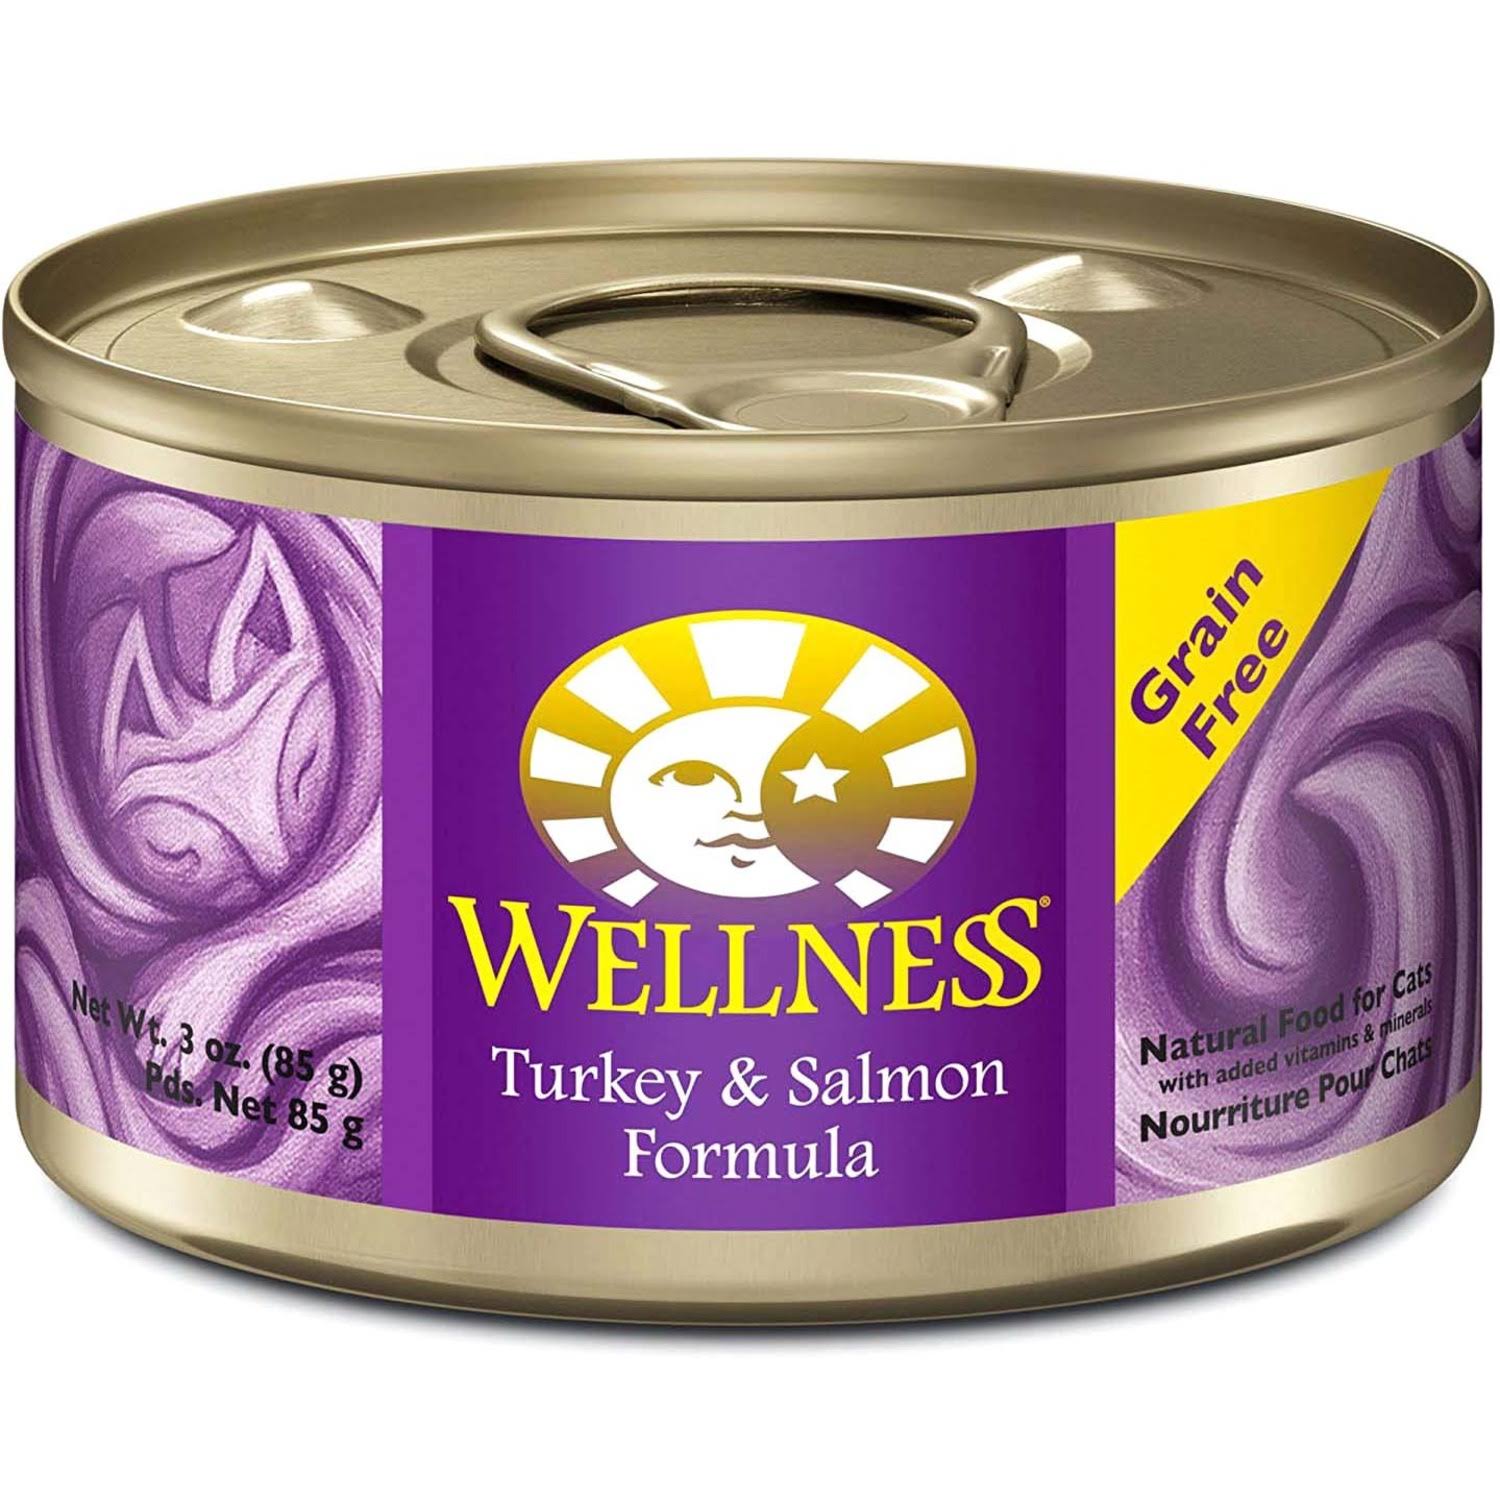 Wellness Complete Health Natural Canned Cat Food - Turkey and Salmon, Grain Free, Wet, 3oz